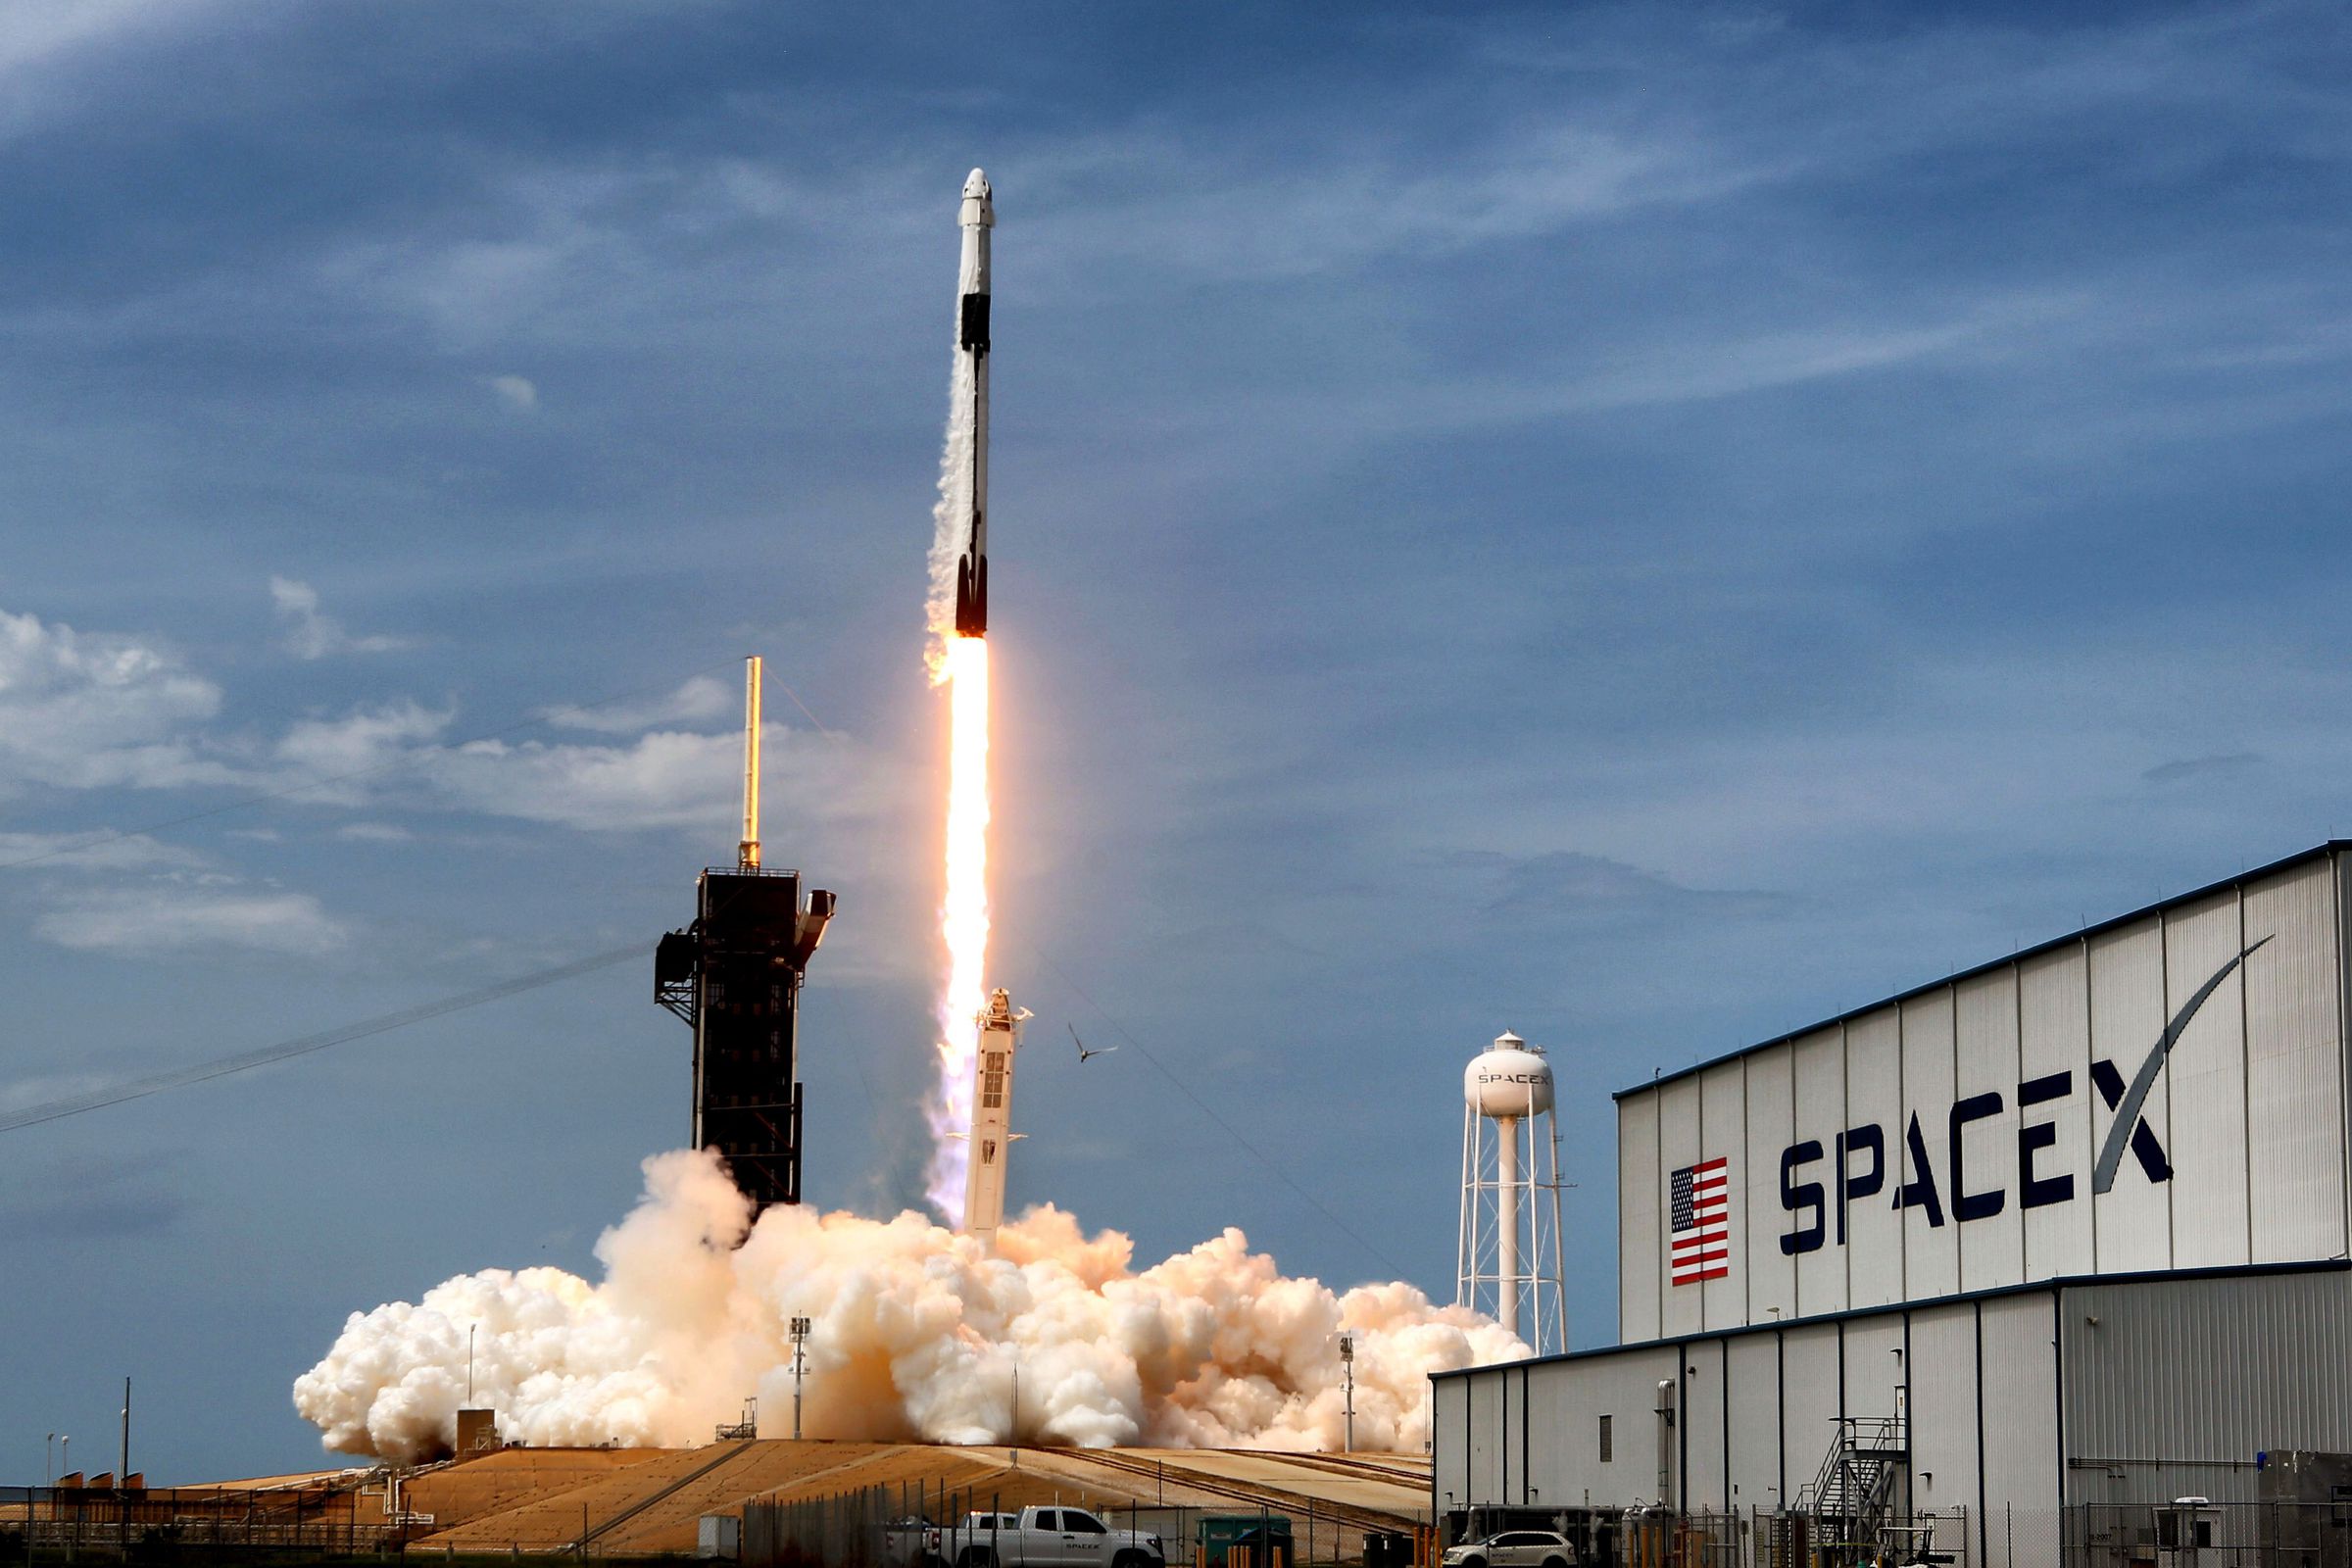 The SpaceX Falcon 9 rocket carrying astronauts Doug Hurley and Bob Behnken in the Crew Dragon capsule lifts off from Kennedy Space Center, Florida, on May 30, 2020.